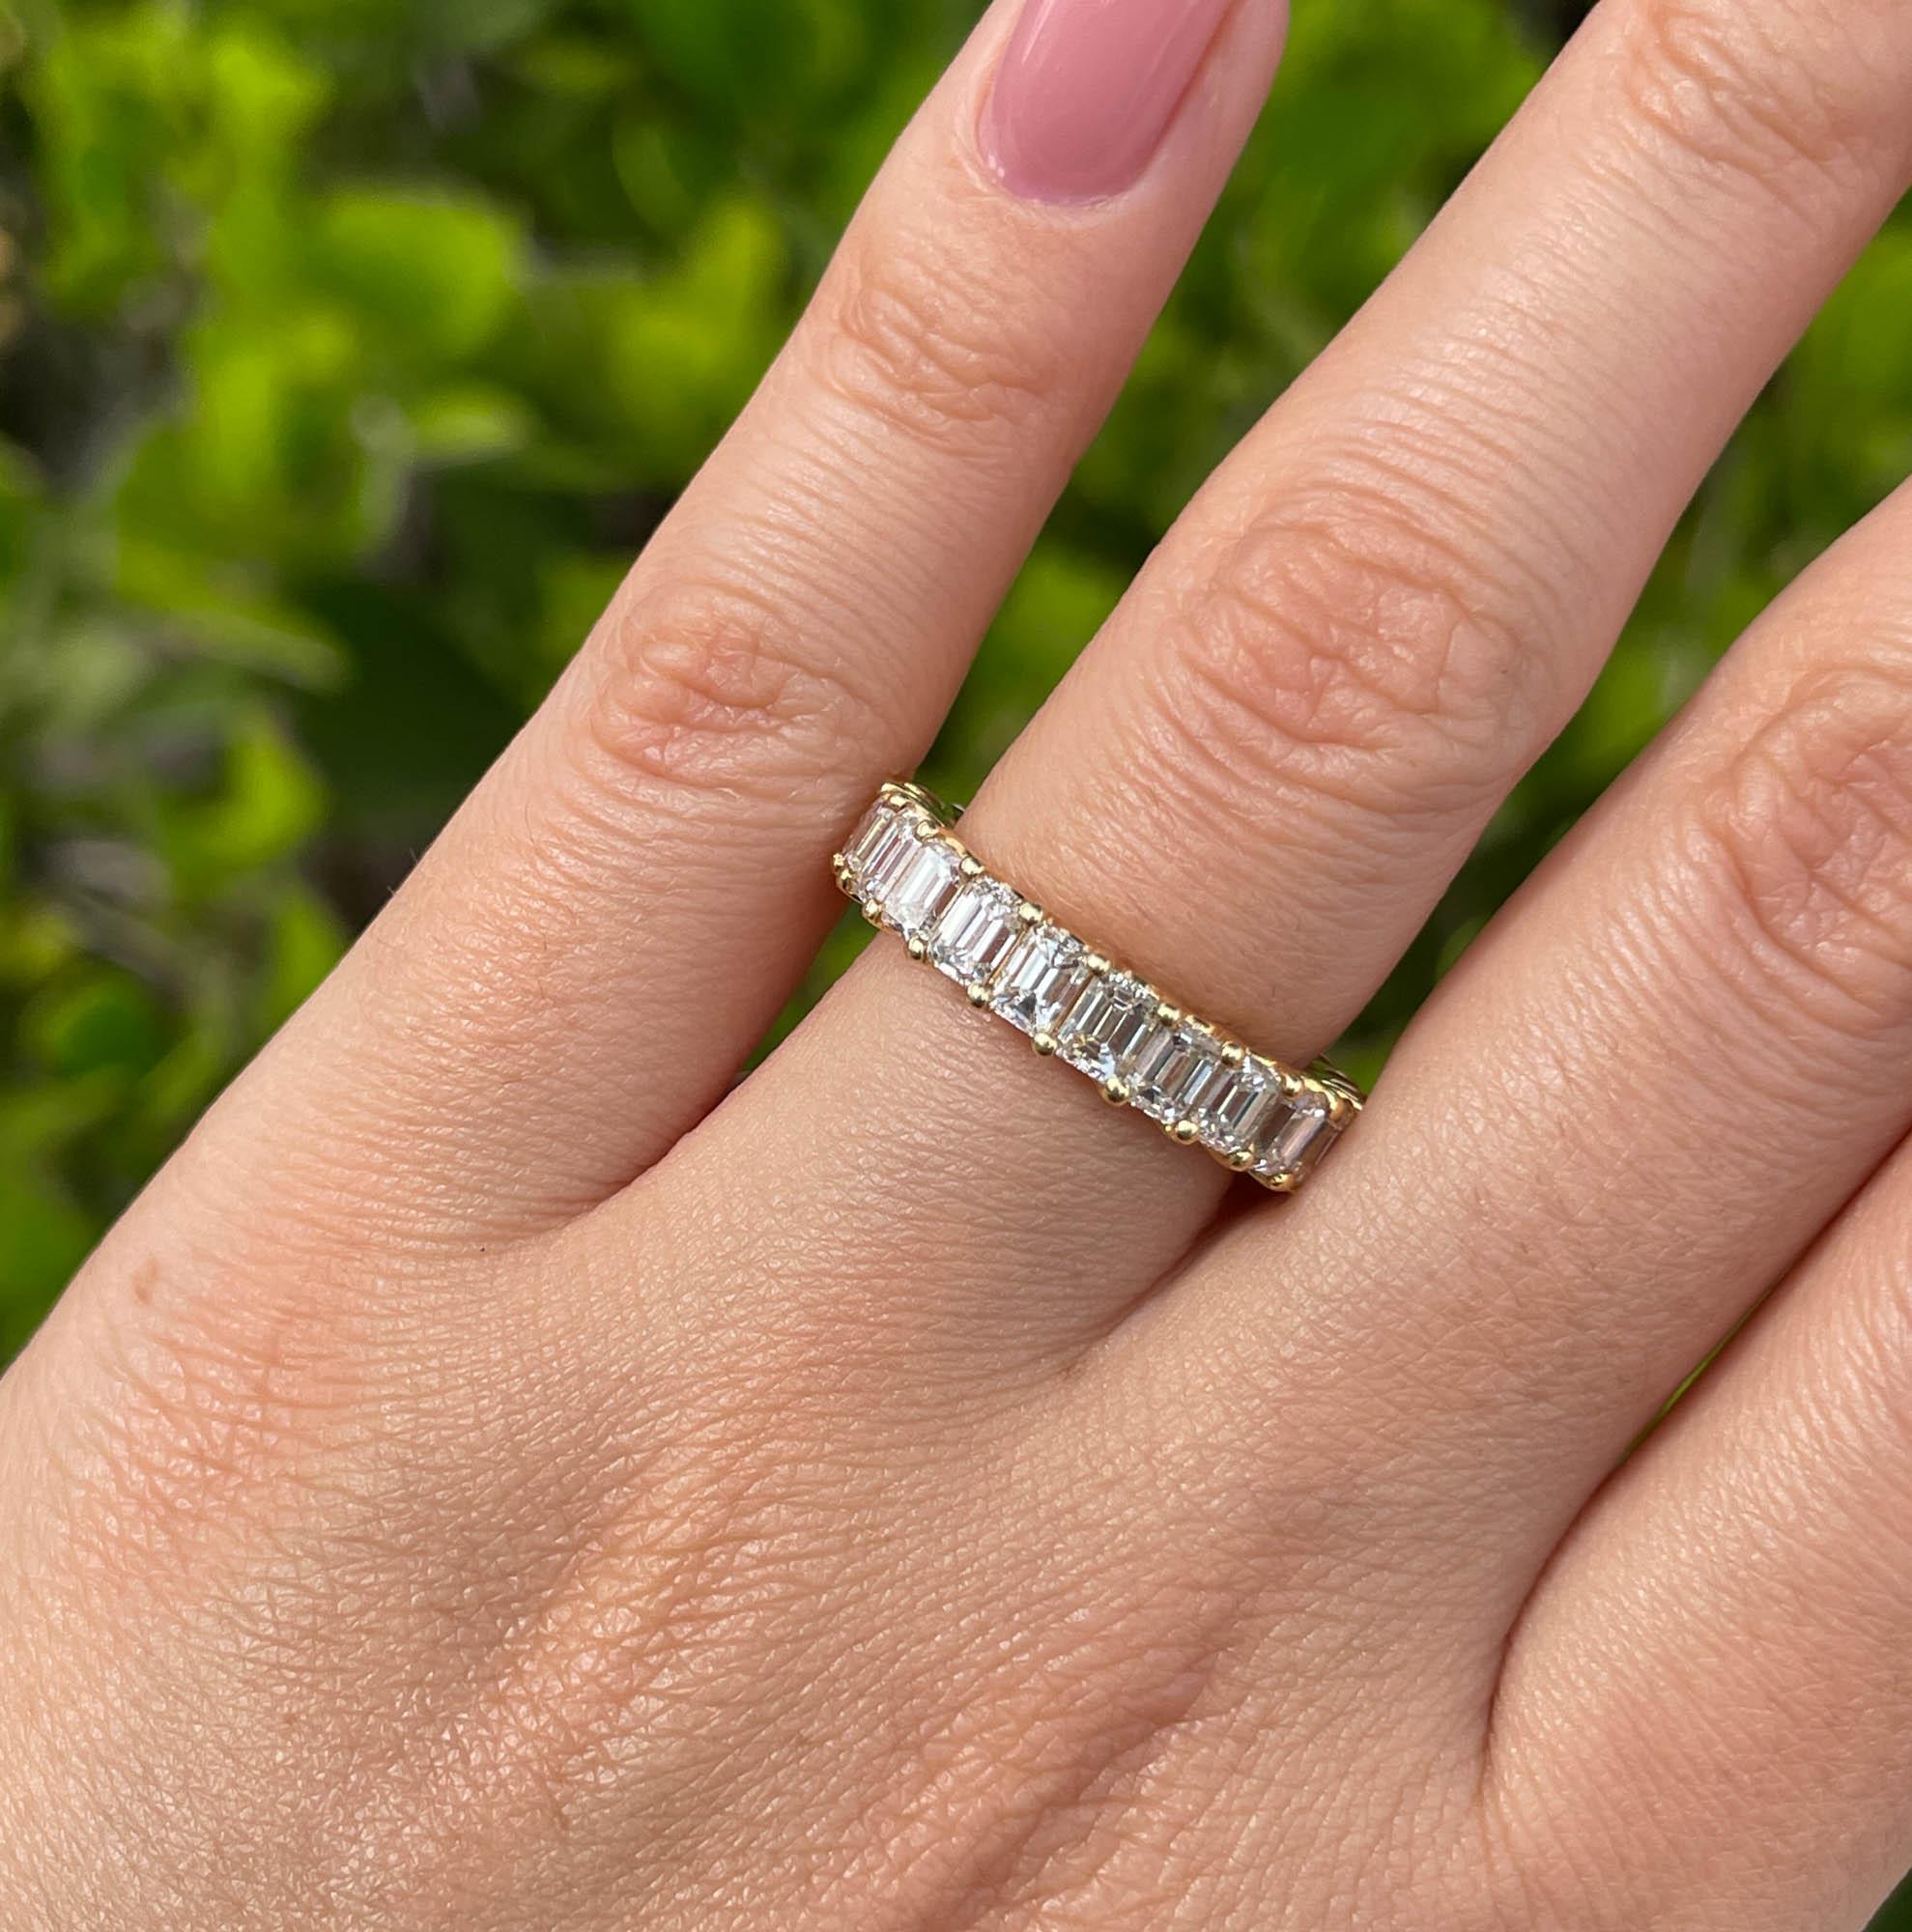 Jay Feder 18k Yellow Gold Emerald cut Diamond Eternity Wedding Band

There are 23 Emerald cut diamonds; total carat weight is 5.48 carats; VS clarity overall.

Sits 3.40mm from the top off the finger. The band is 3.90mm wide. Total weight of the